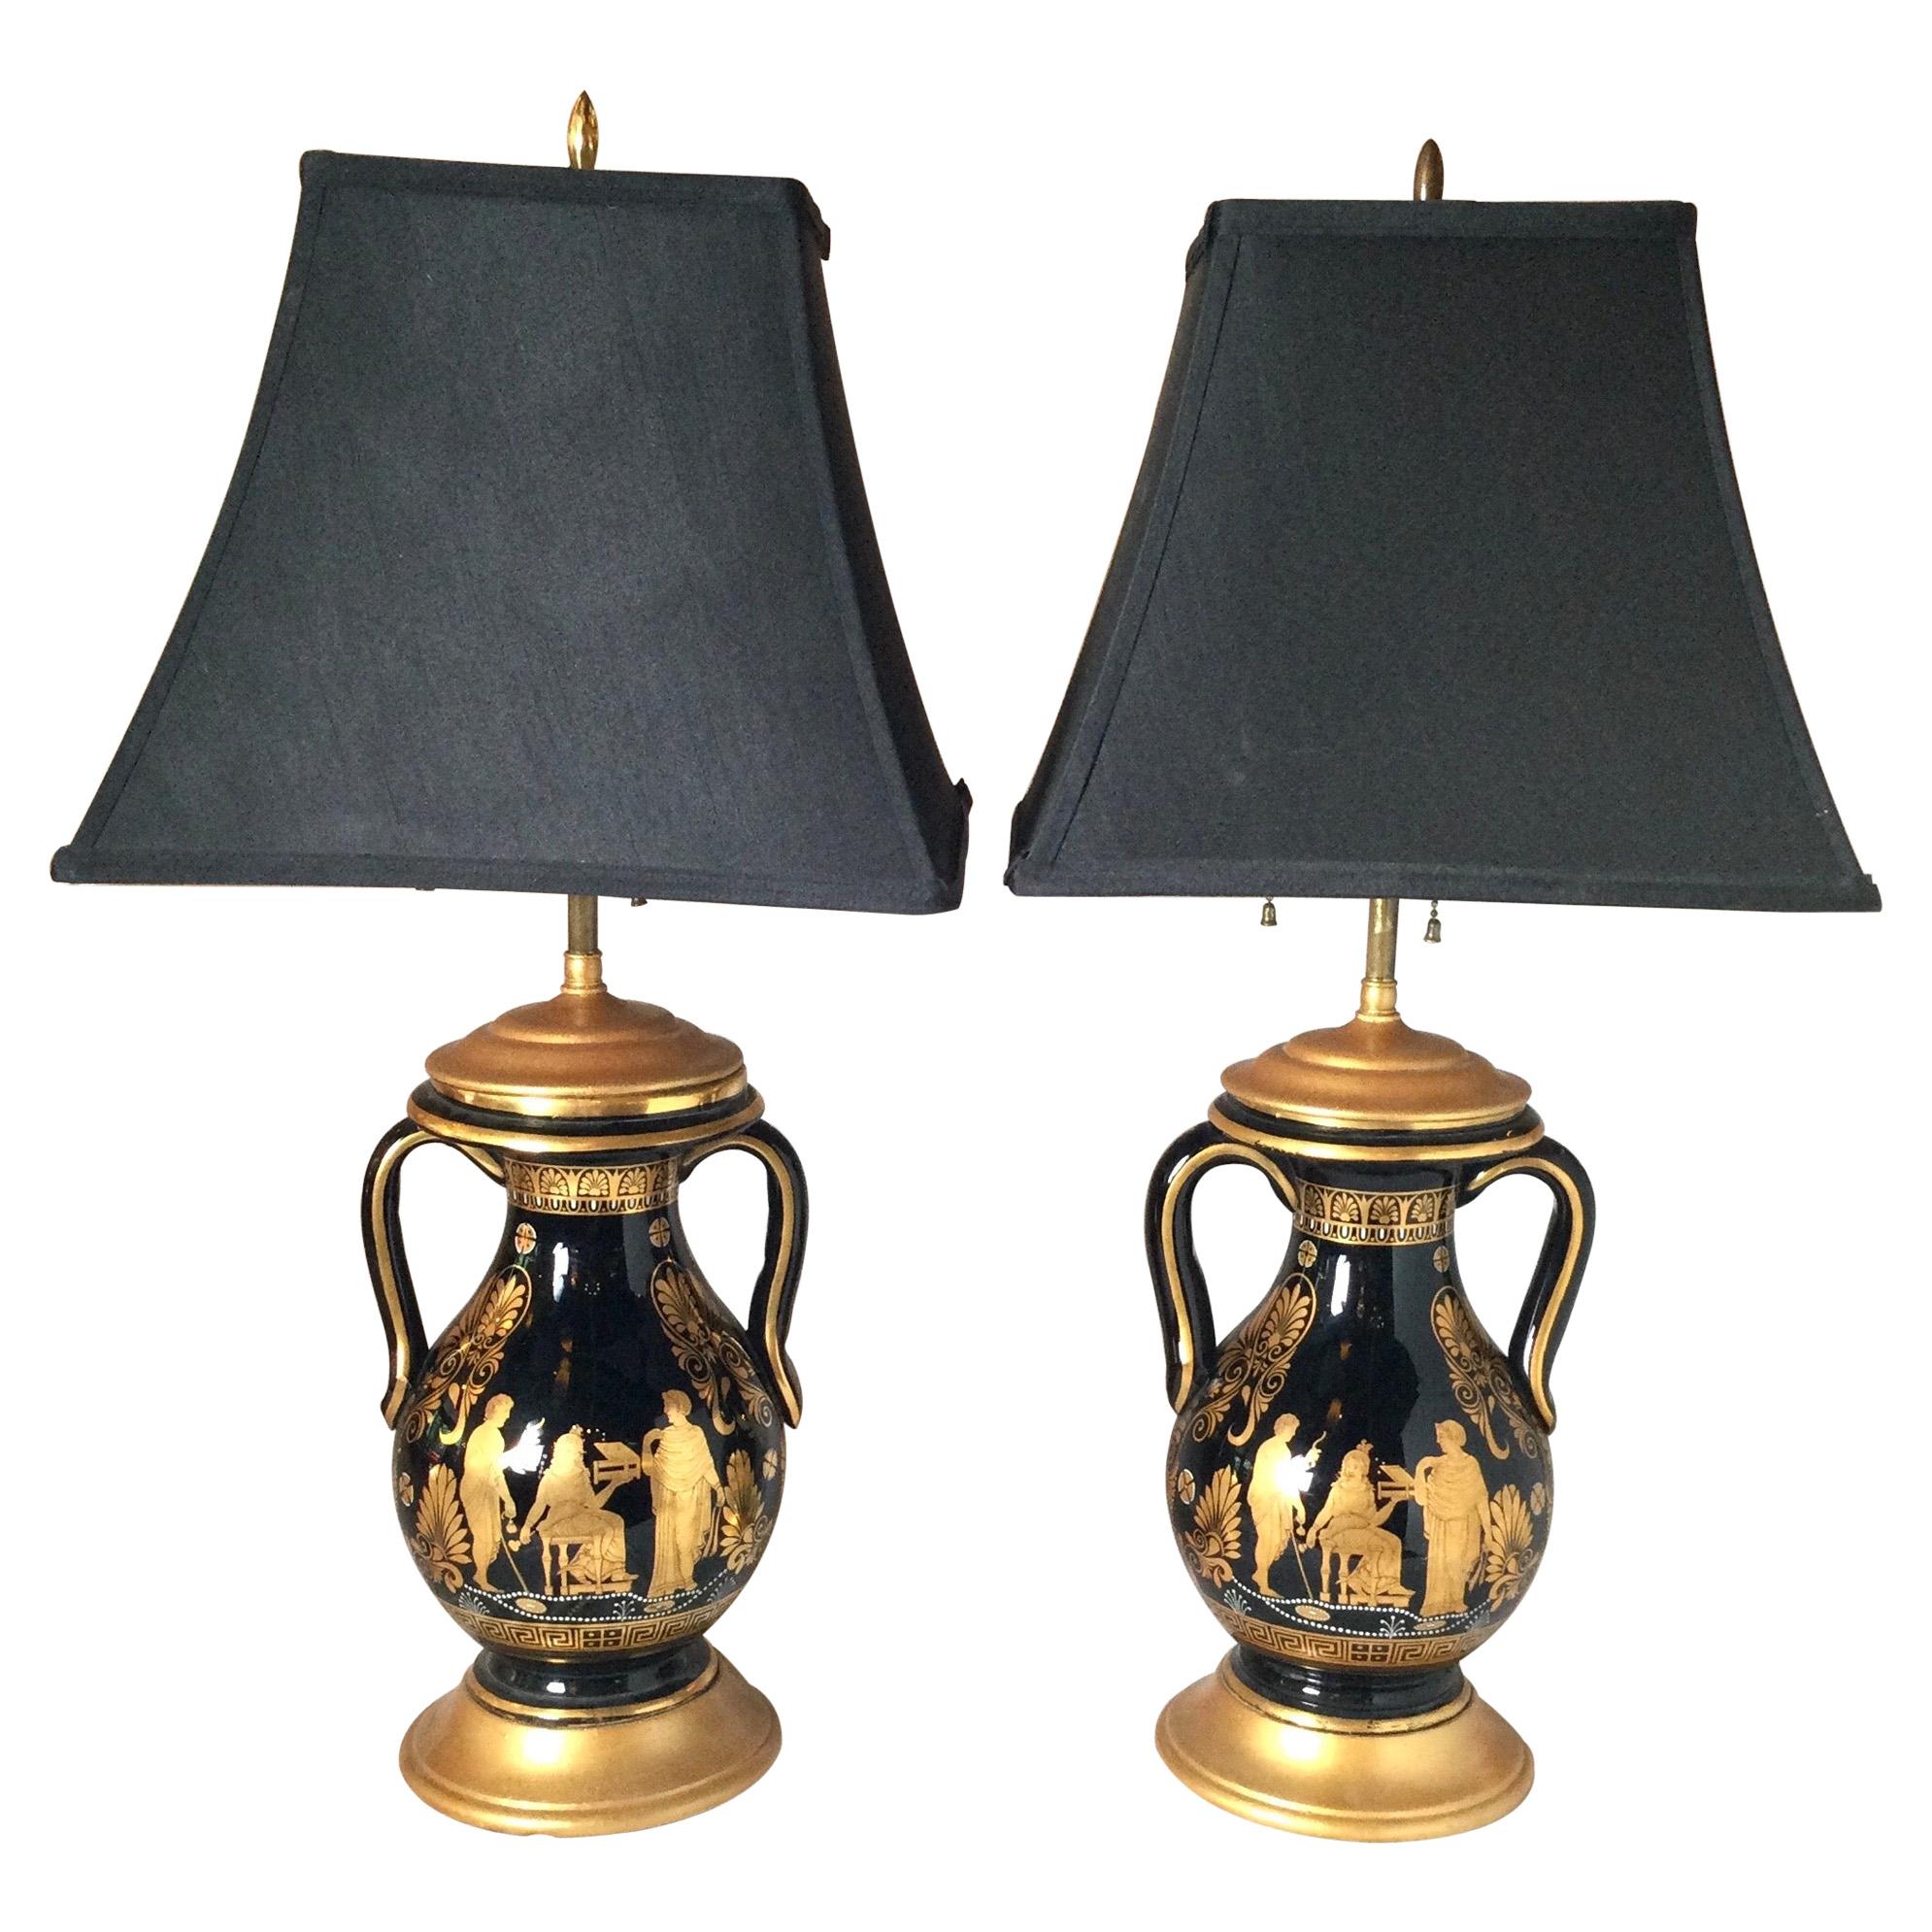 Pair of Black and Gilt Neoclassical Urn Lamps For Sale